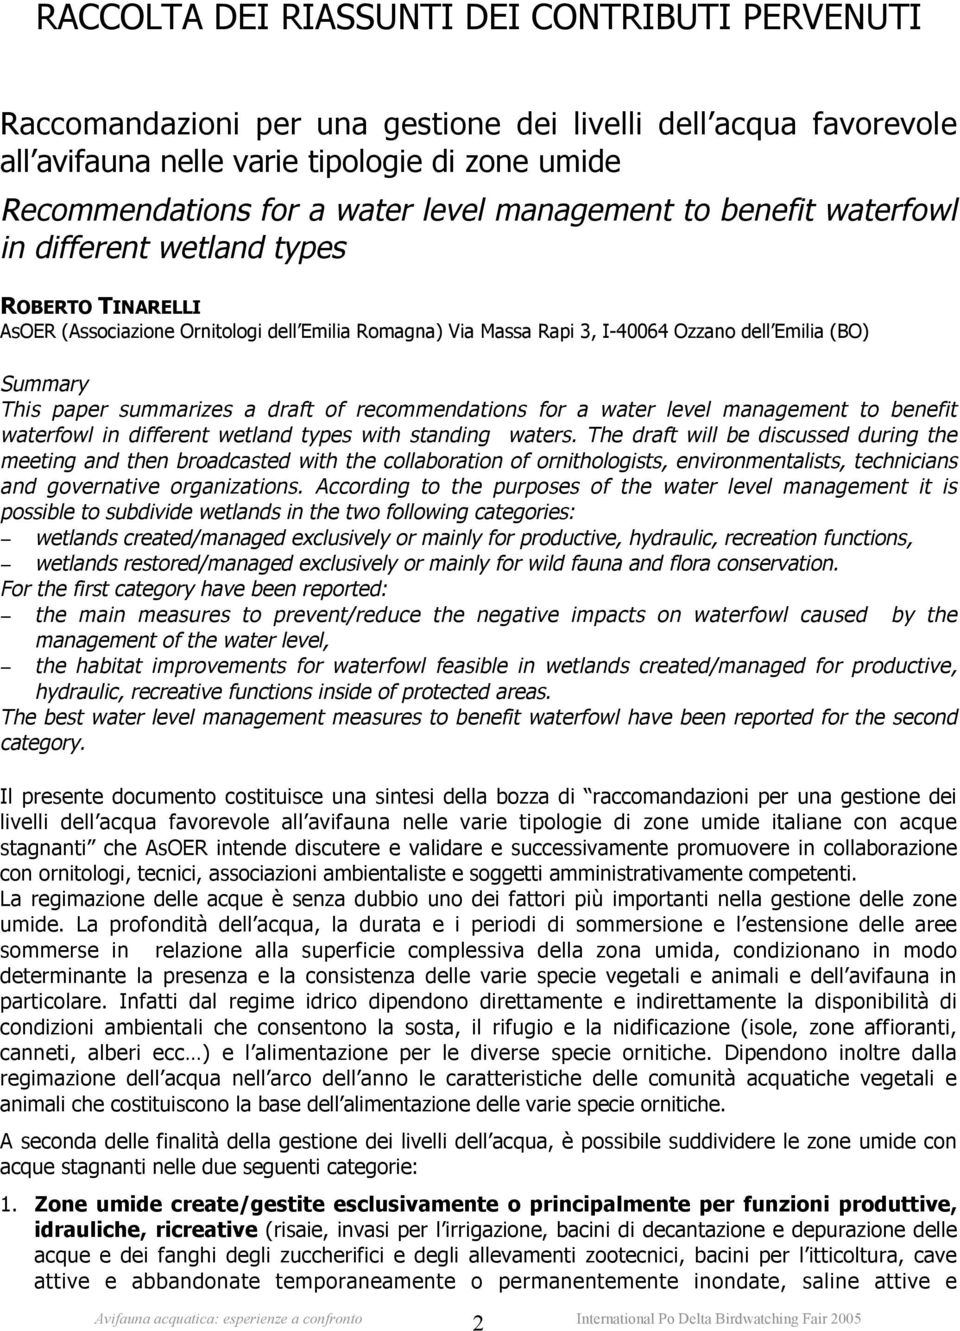 summarizes a draft of recommendations for a water level management to benefit waterfowl in different wetland types with standing waters.